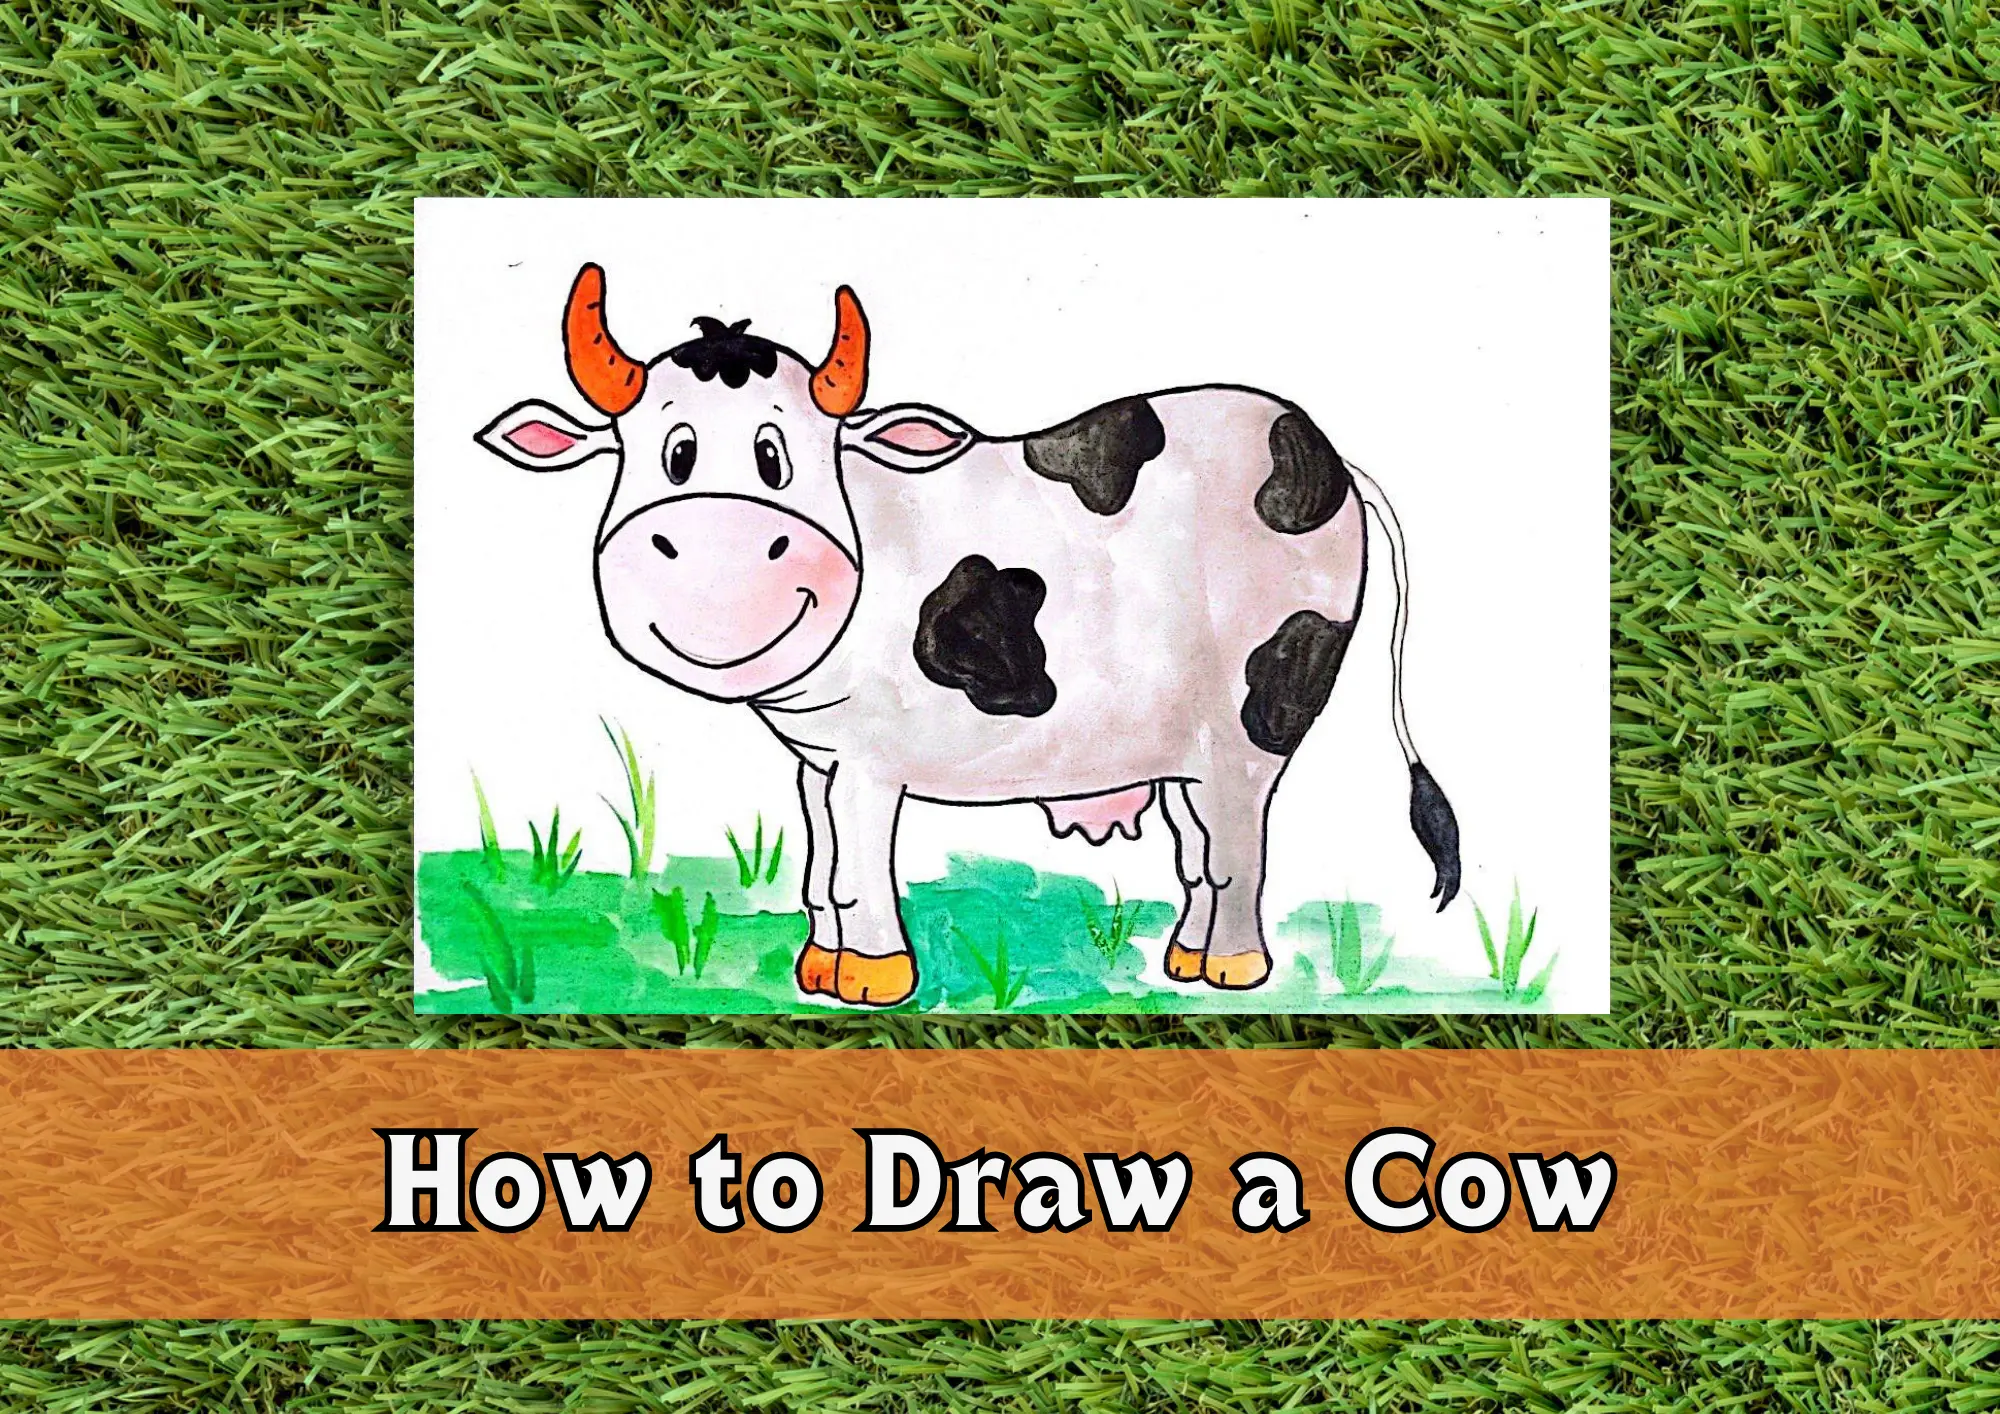 How To Draw A Cow In 8 Easy Steps (Instructions For Kids) - VerbNow